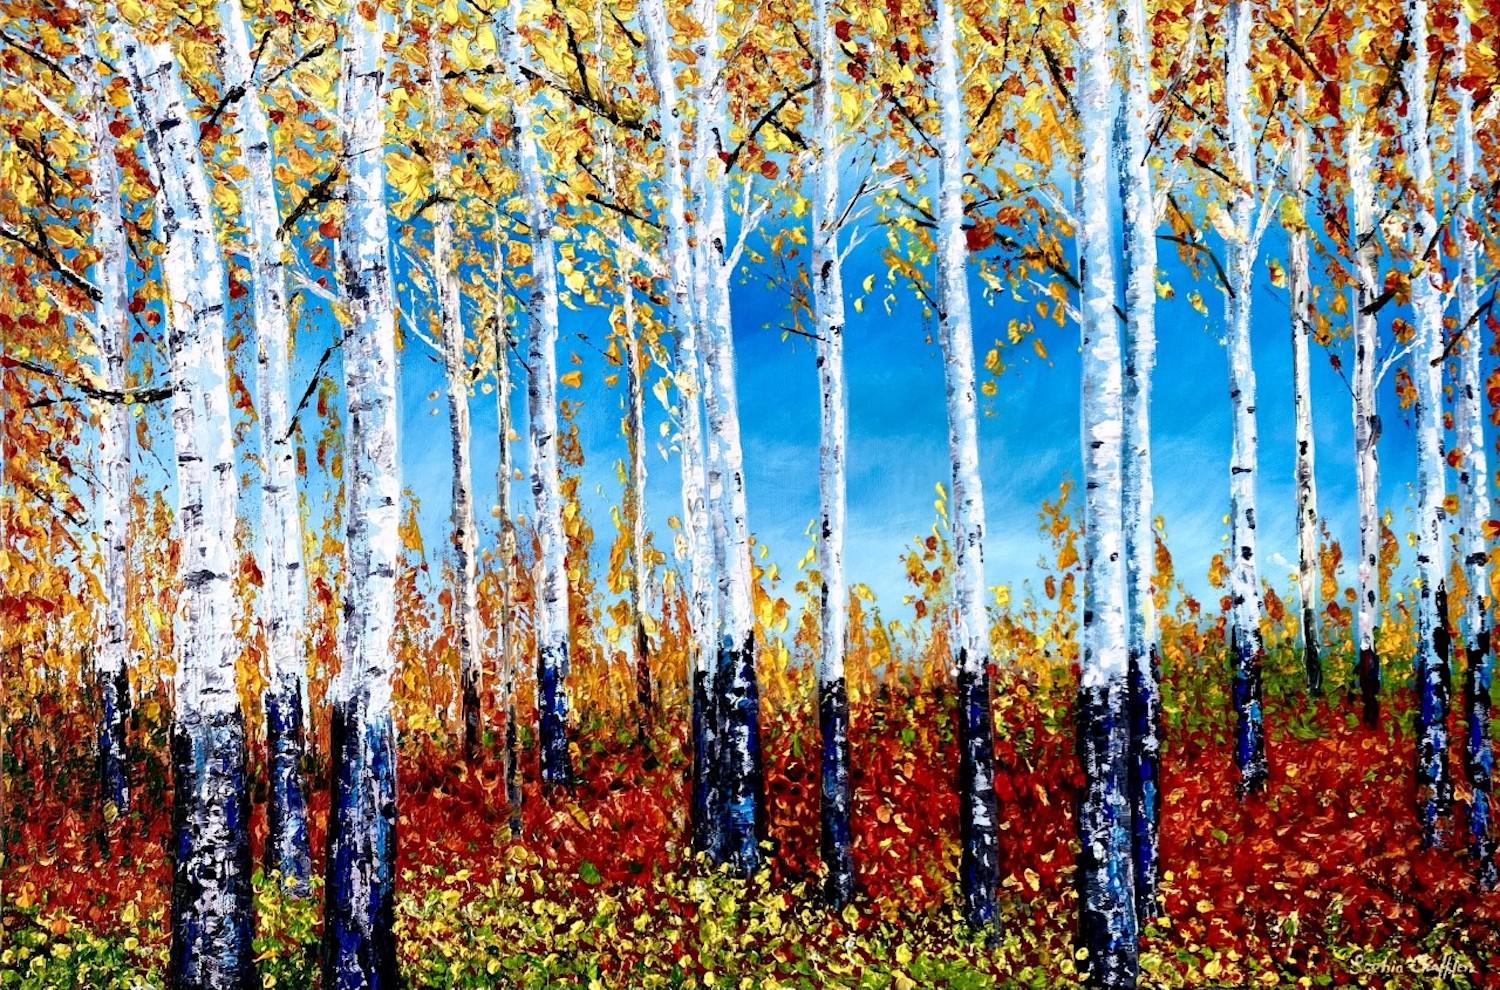 Forest of Dreams by Sophia Chalklen, Original painting, Landscape, Tree Art - Abstract Painting by Sophia Chalklen 